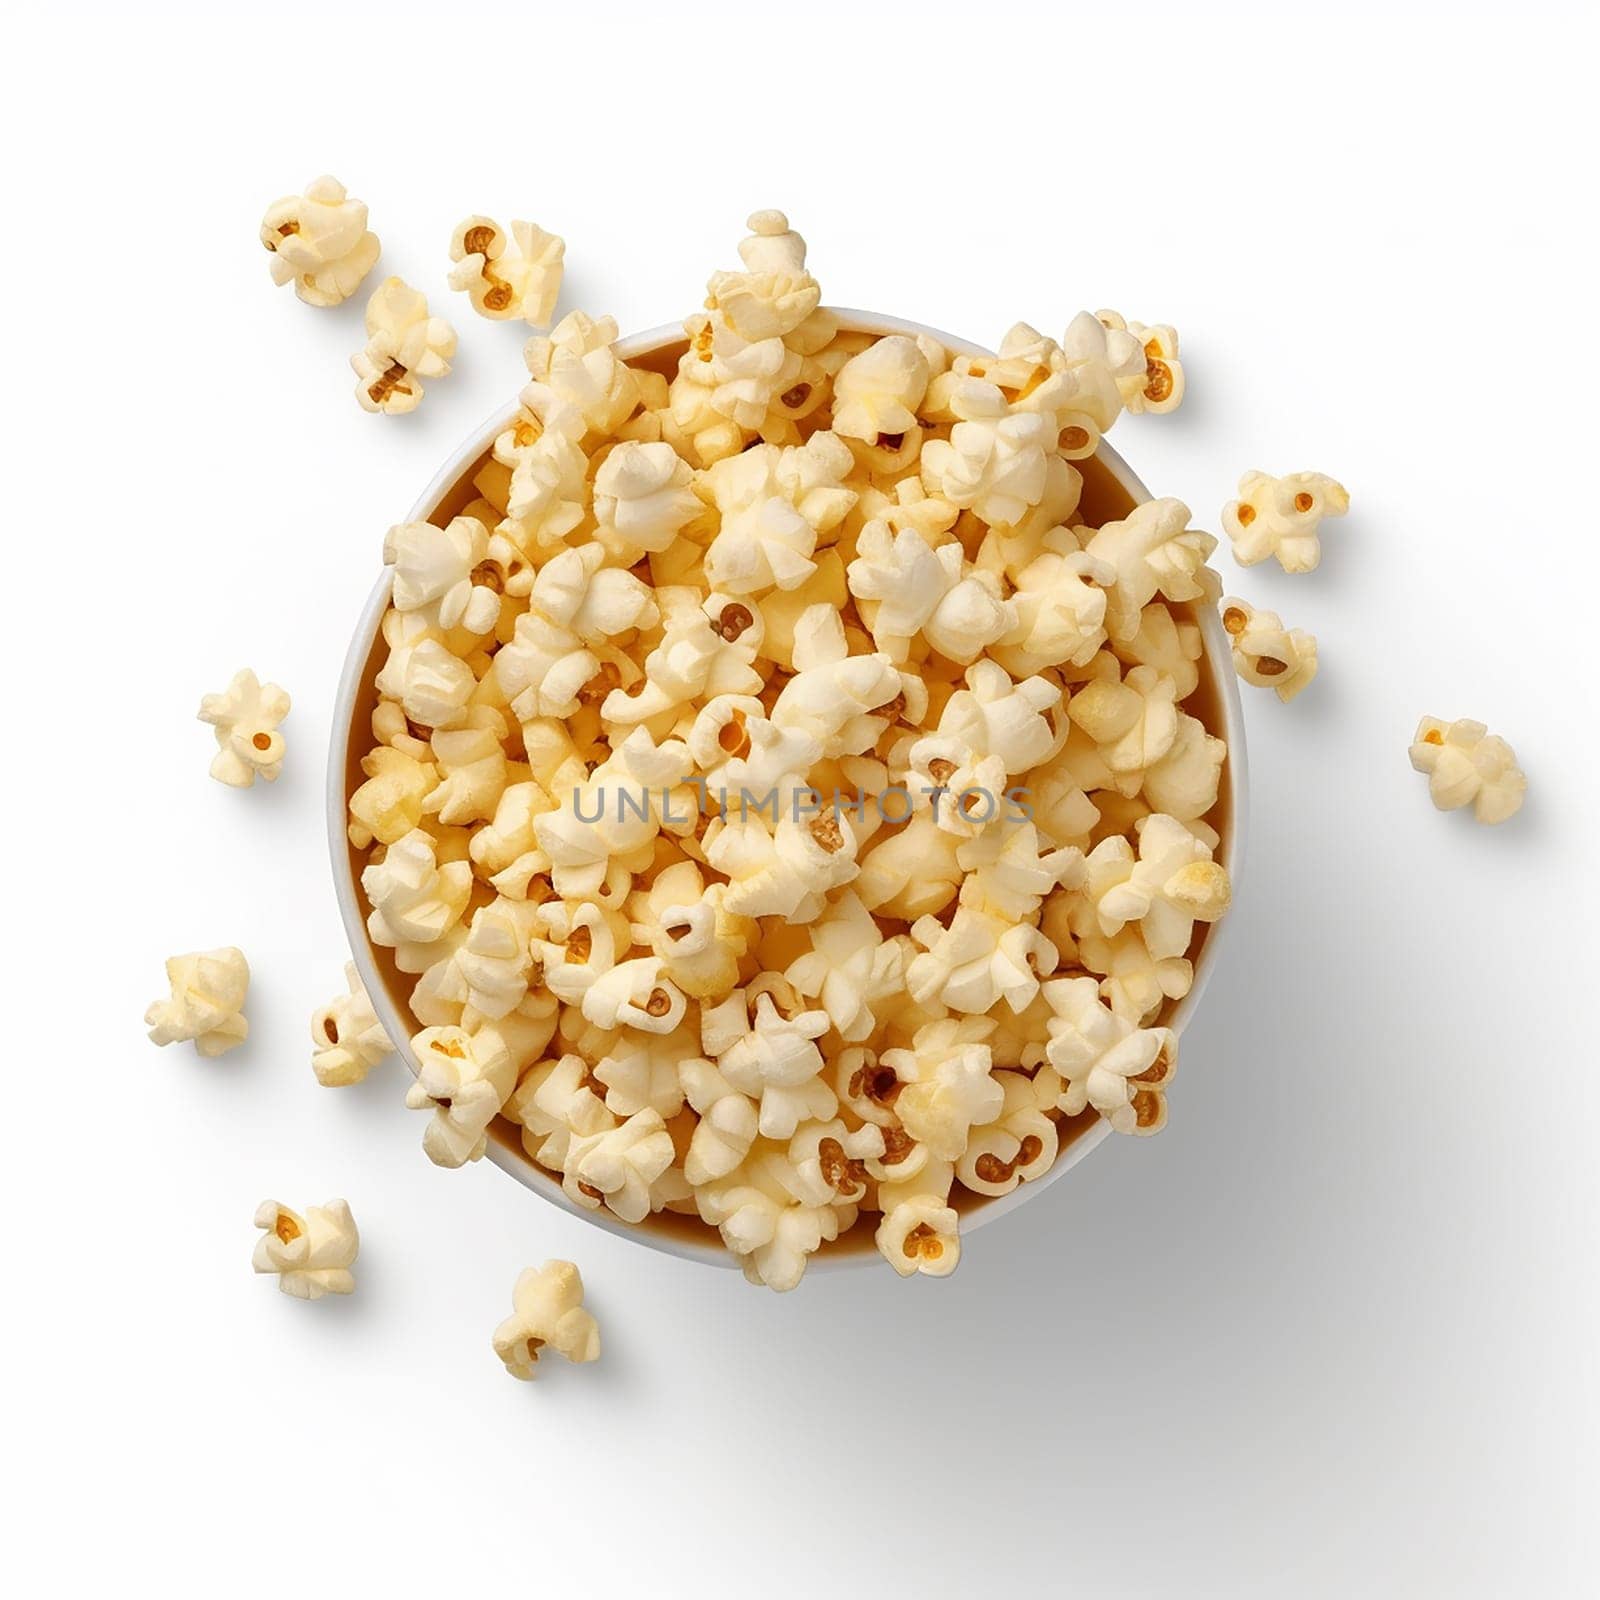 A bowl filled with freshly popped popcorn on a white background.